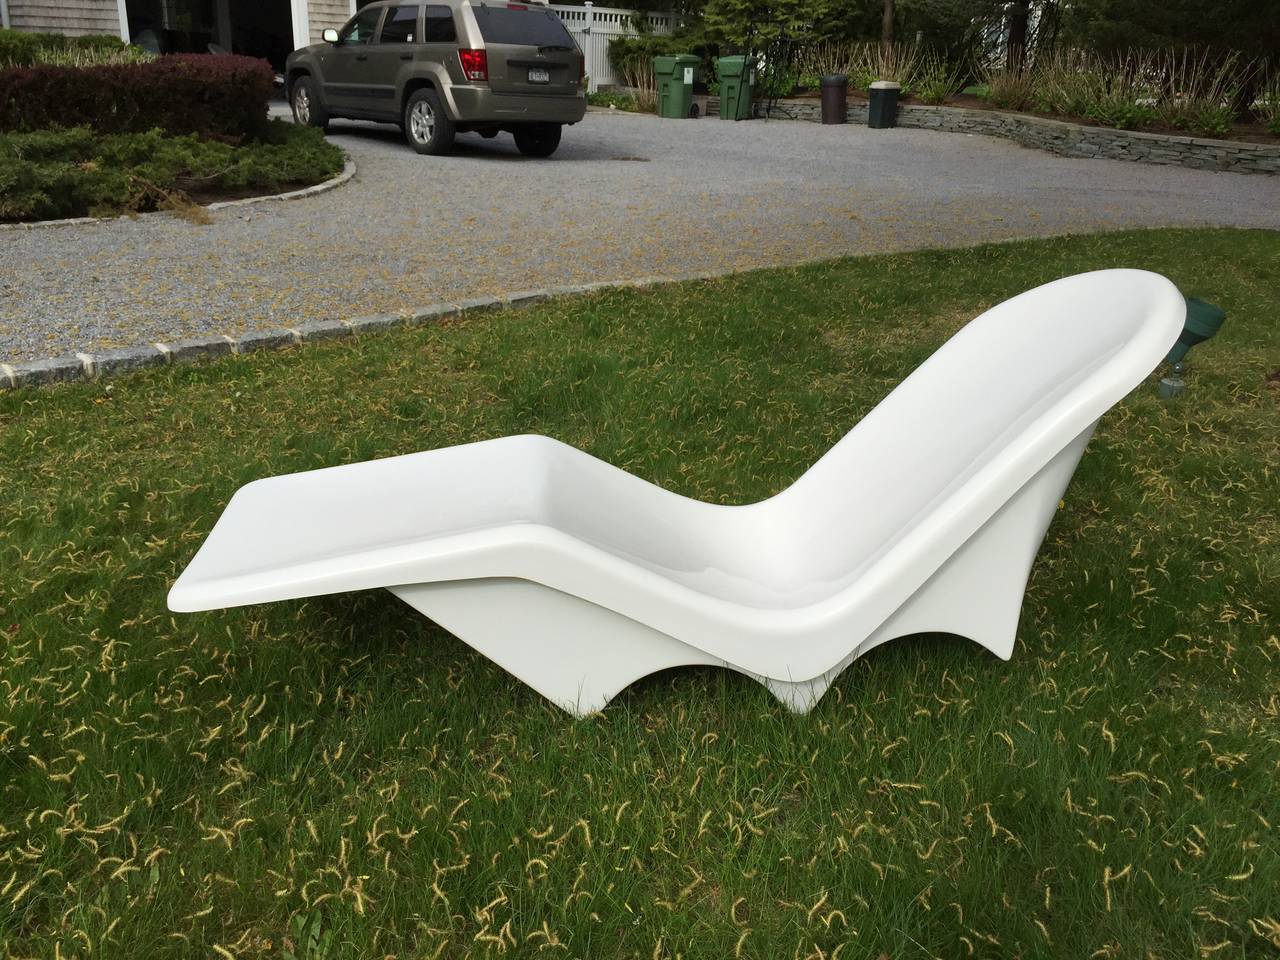 This Mid-Century styled fiberglass lounge is fabricated in a durable fiberglass shell, gracefully contoured and hand polished to a very high gloss white finish.
A modern Classic and a striking statement both indoors and at poolside.

Fiberglass